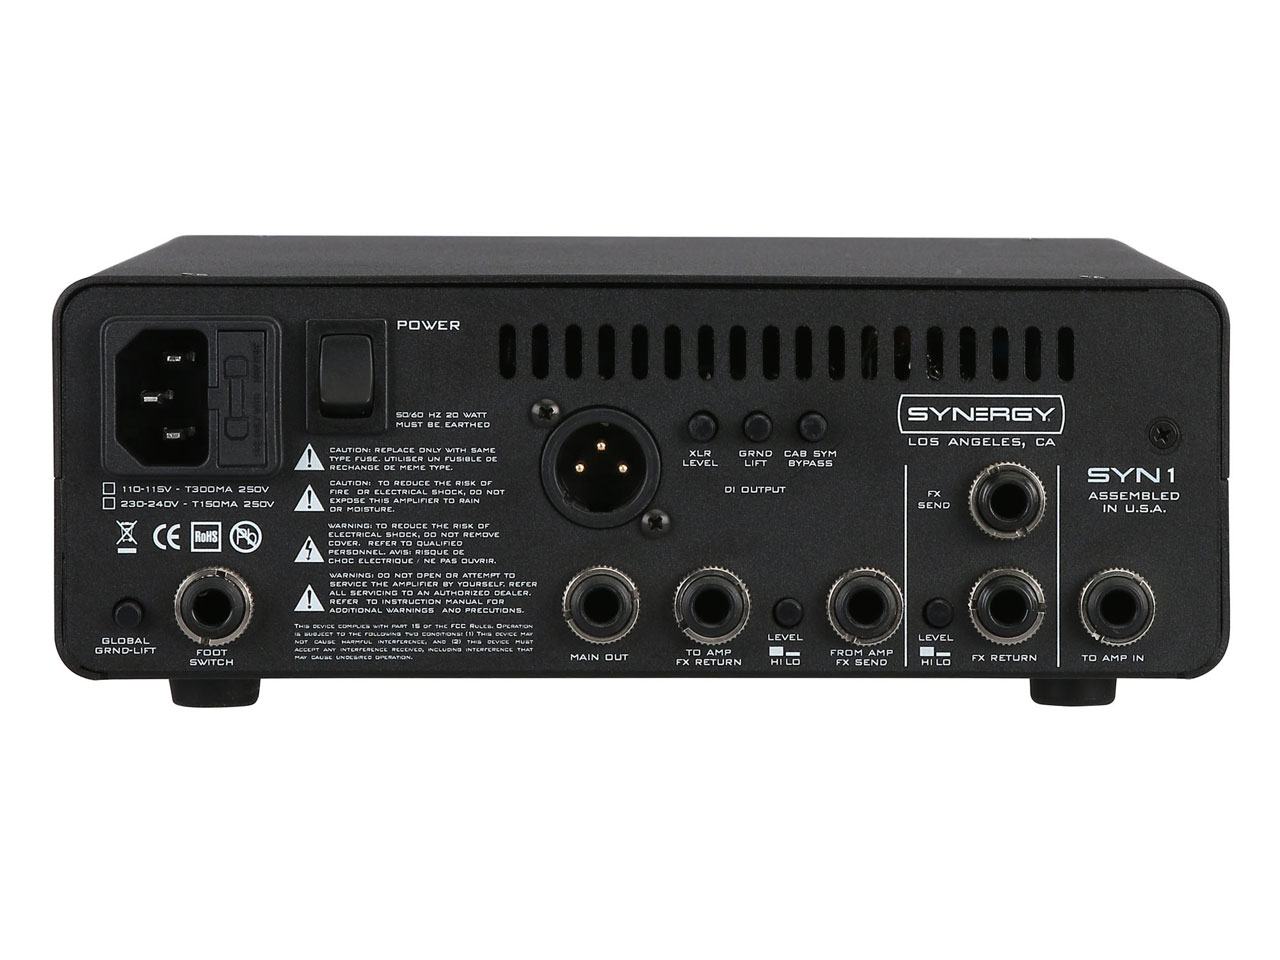 SYNERGY AMPS(シナジーアンプ) SYN1：Single-module Tube Preamp (プリアンプ) 駅前店